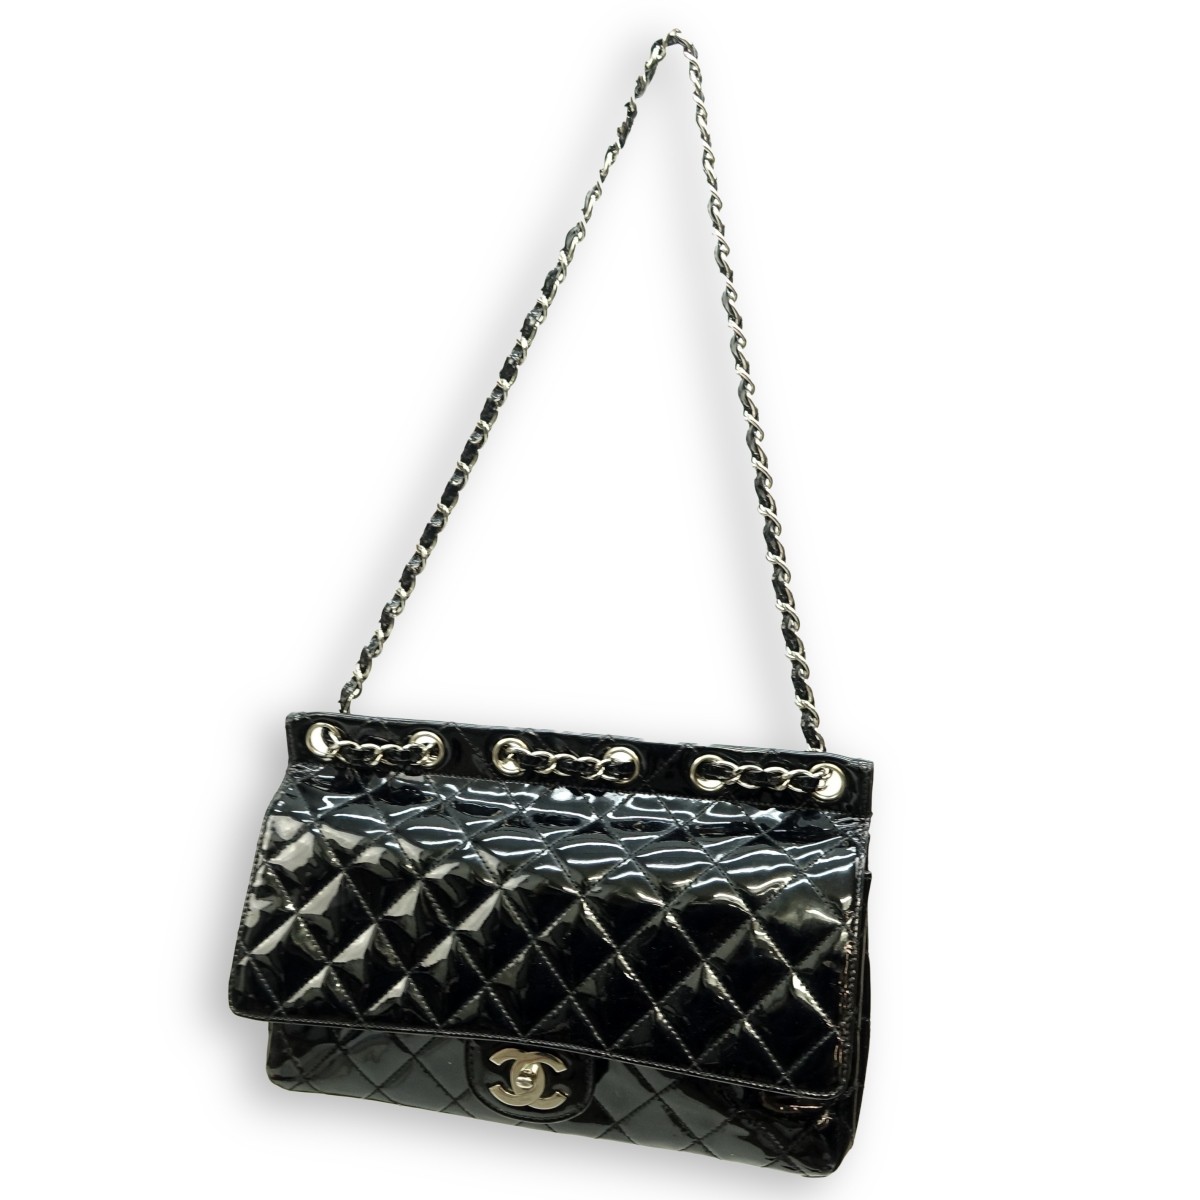 Chanel Jumbo Black Patent Leather Quilted Purse